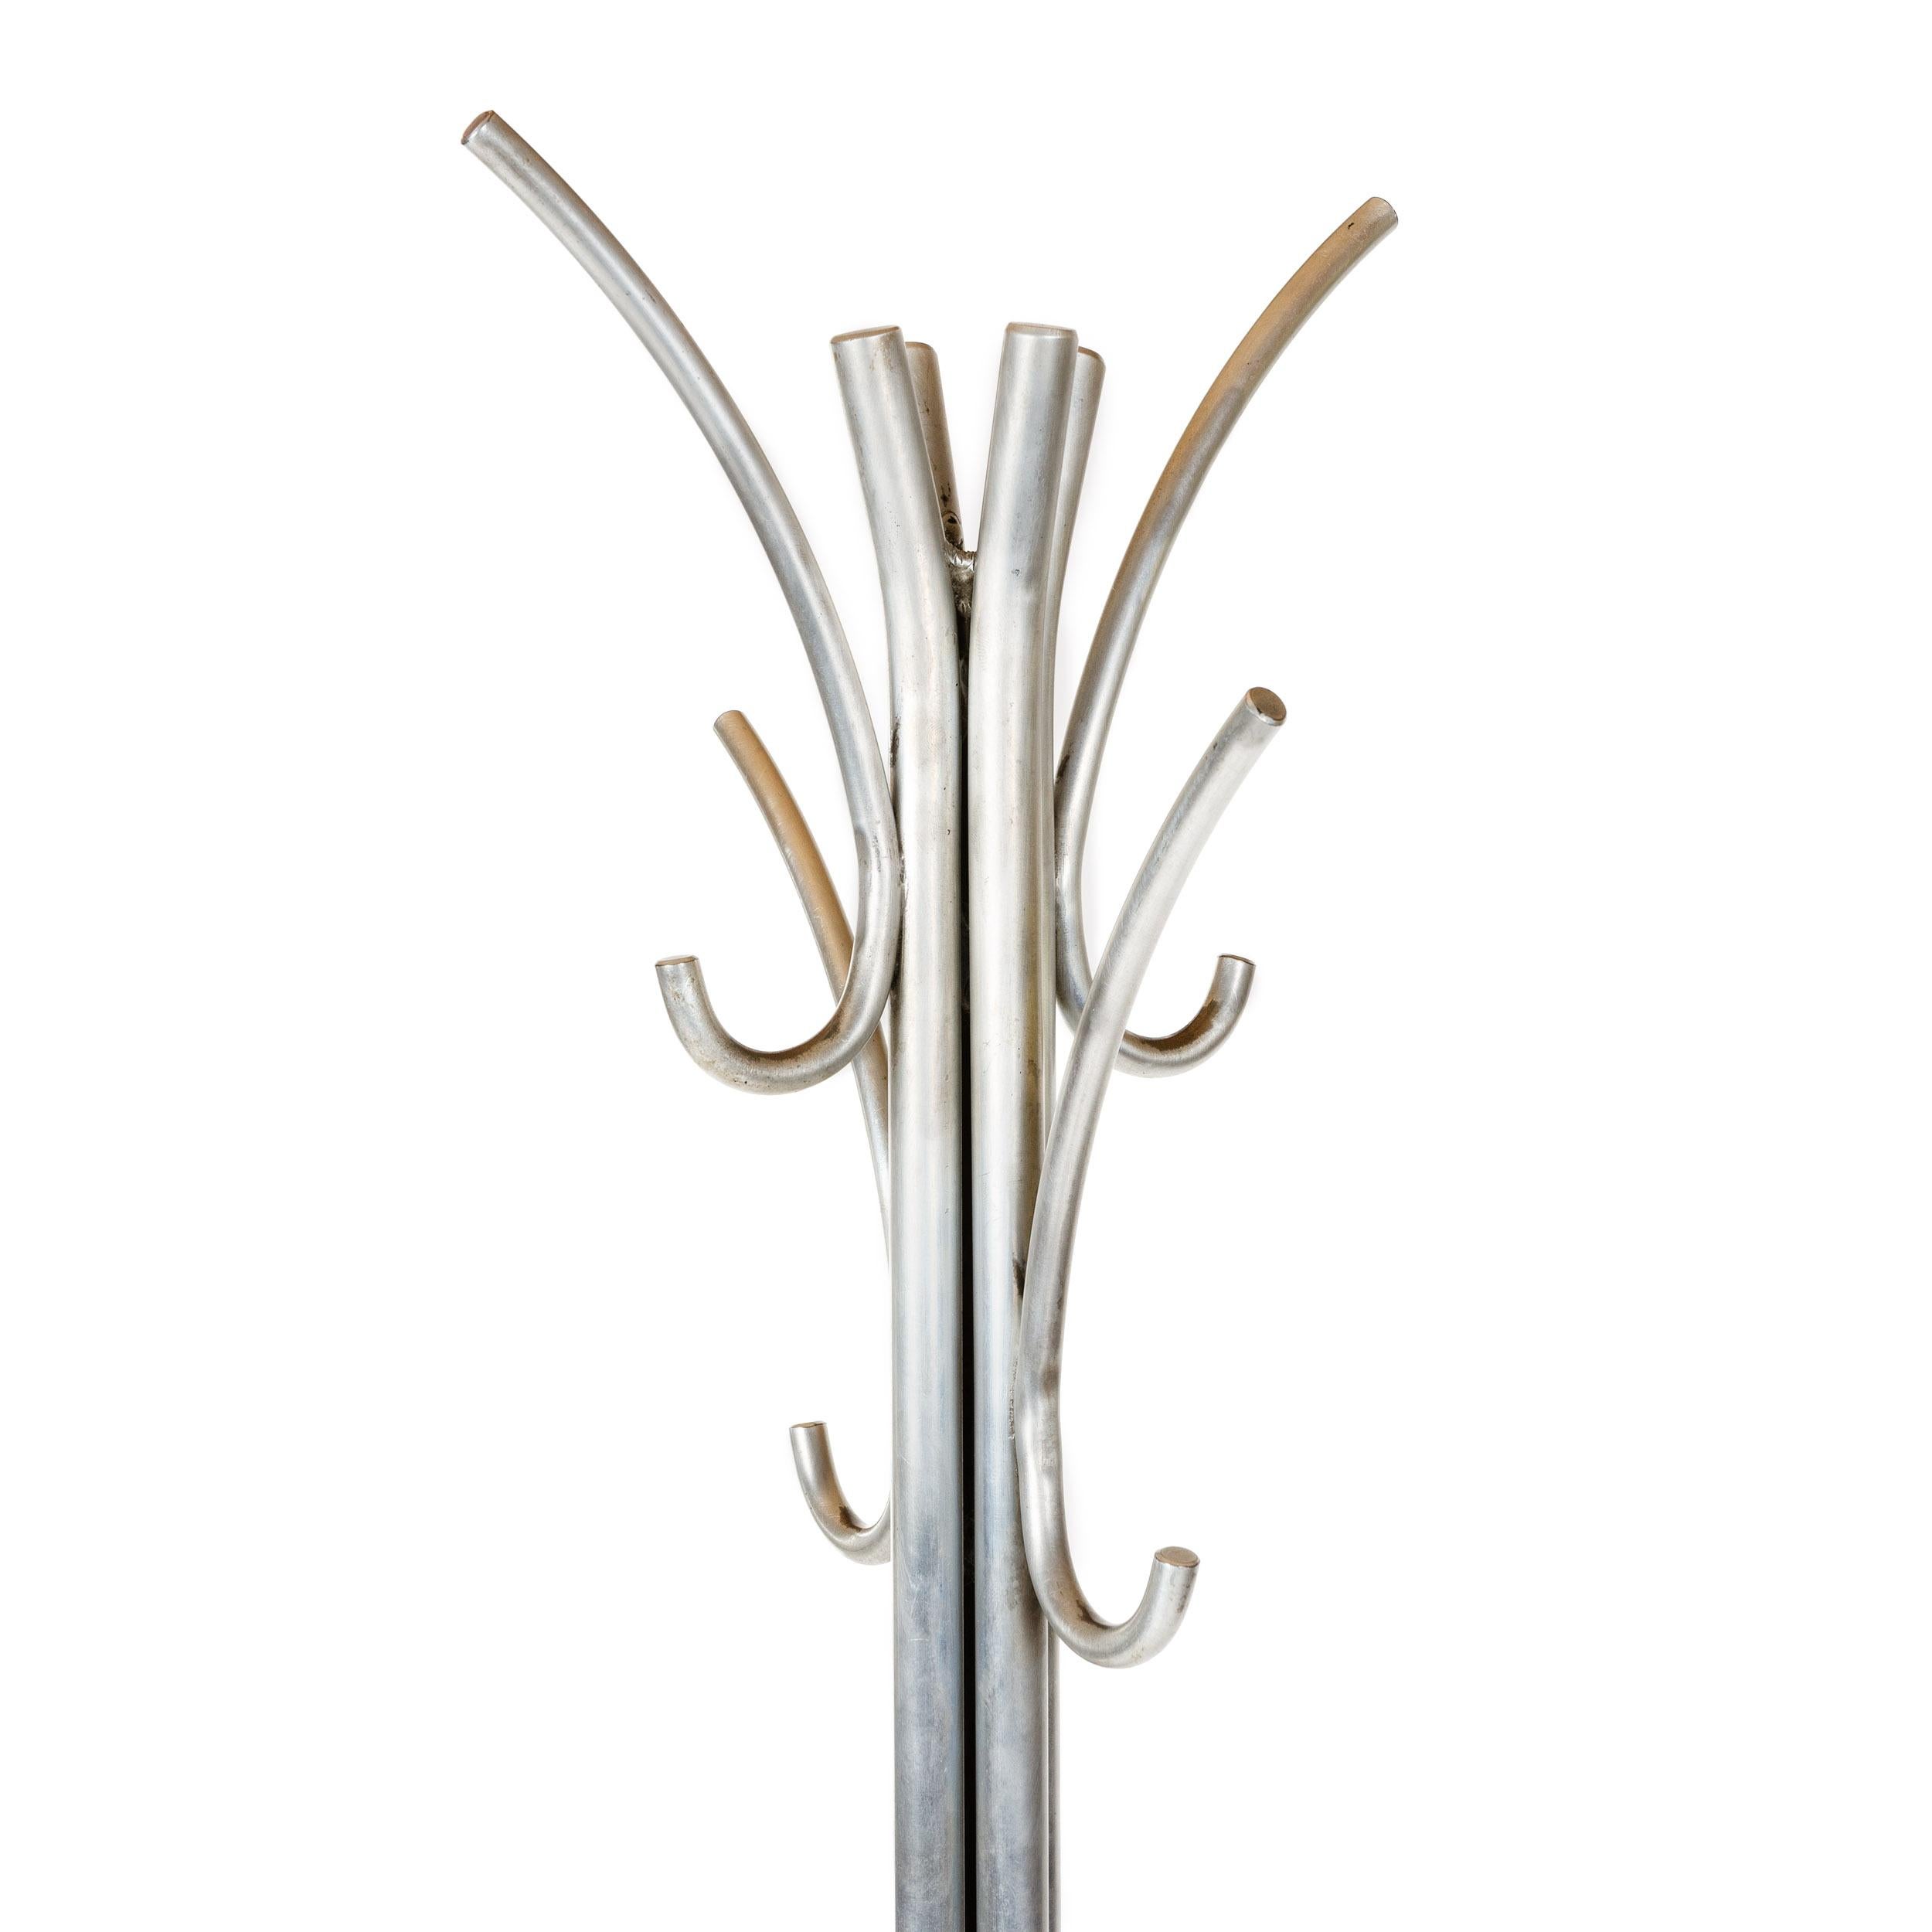 A simple and sublime coat tree with four (4) double hooks, retaining the original nickel finish.